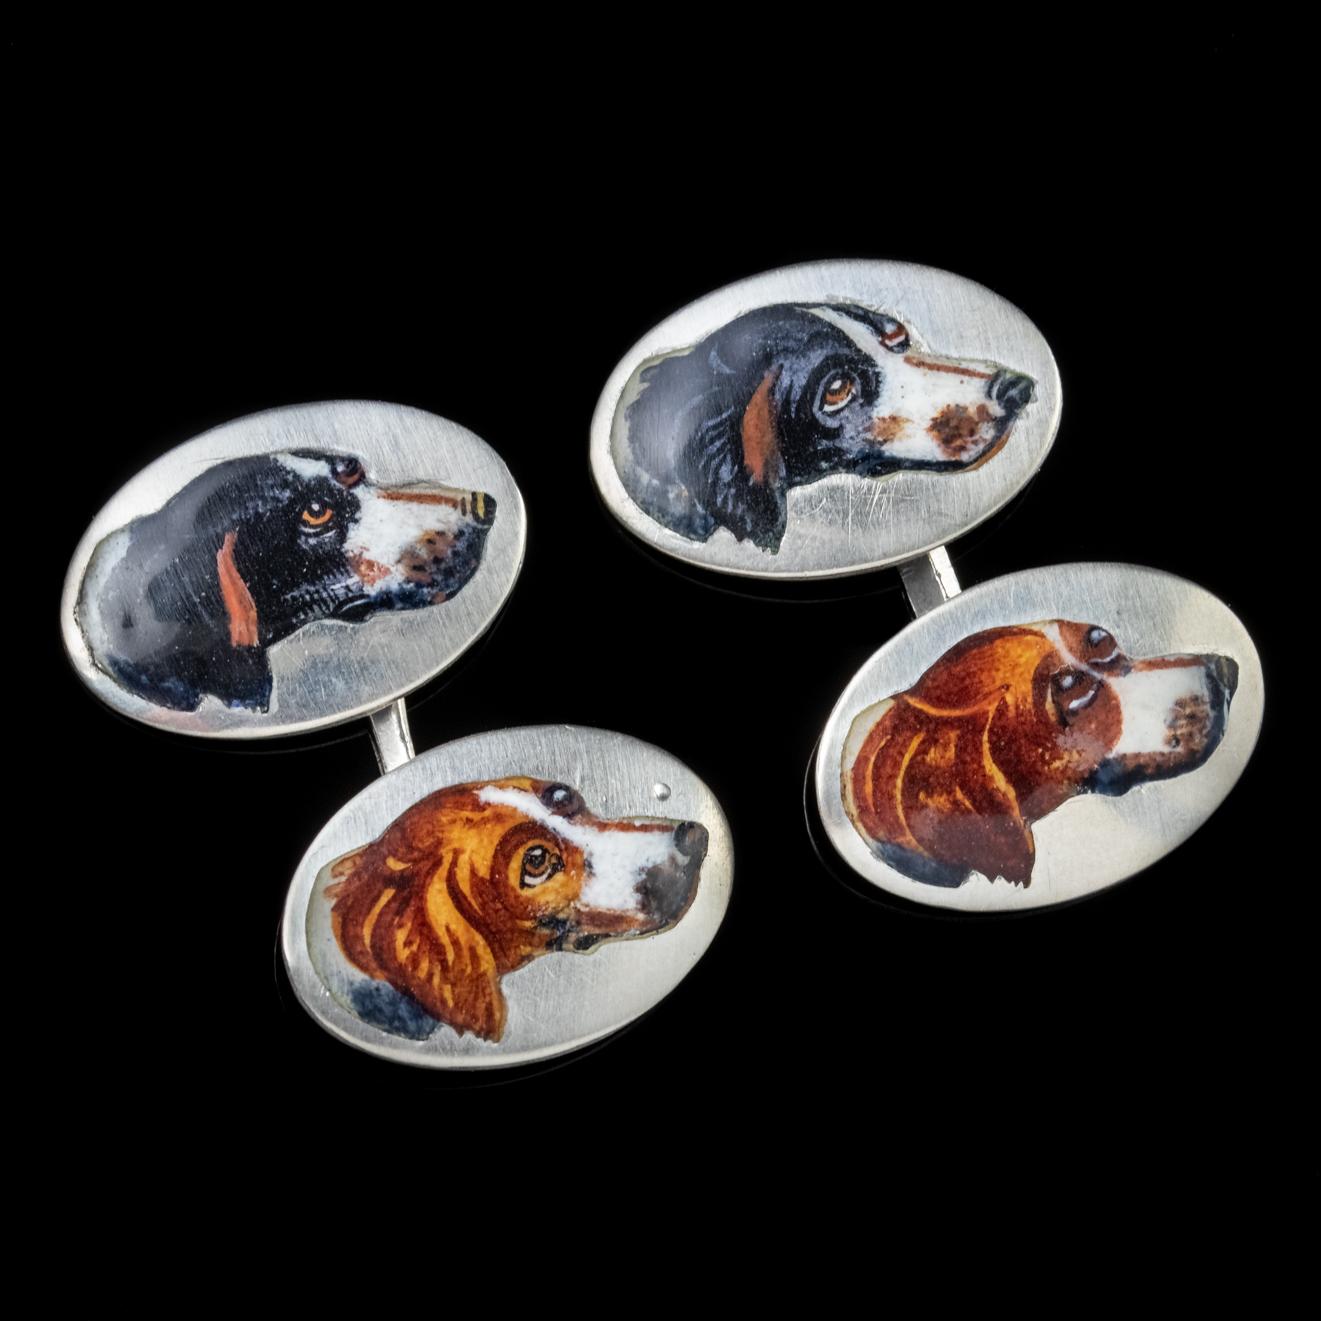 A lovely pair of Antique Victorian double cufflinks featuring detailed Enamel portraits of two Spaniels, one white and brown, the other black and white with adorable big eyes and floppy ears. 

Victorian jewellery mirrored Queen Victoria’s life with